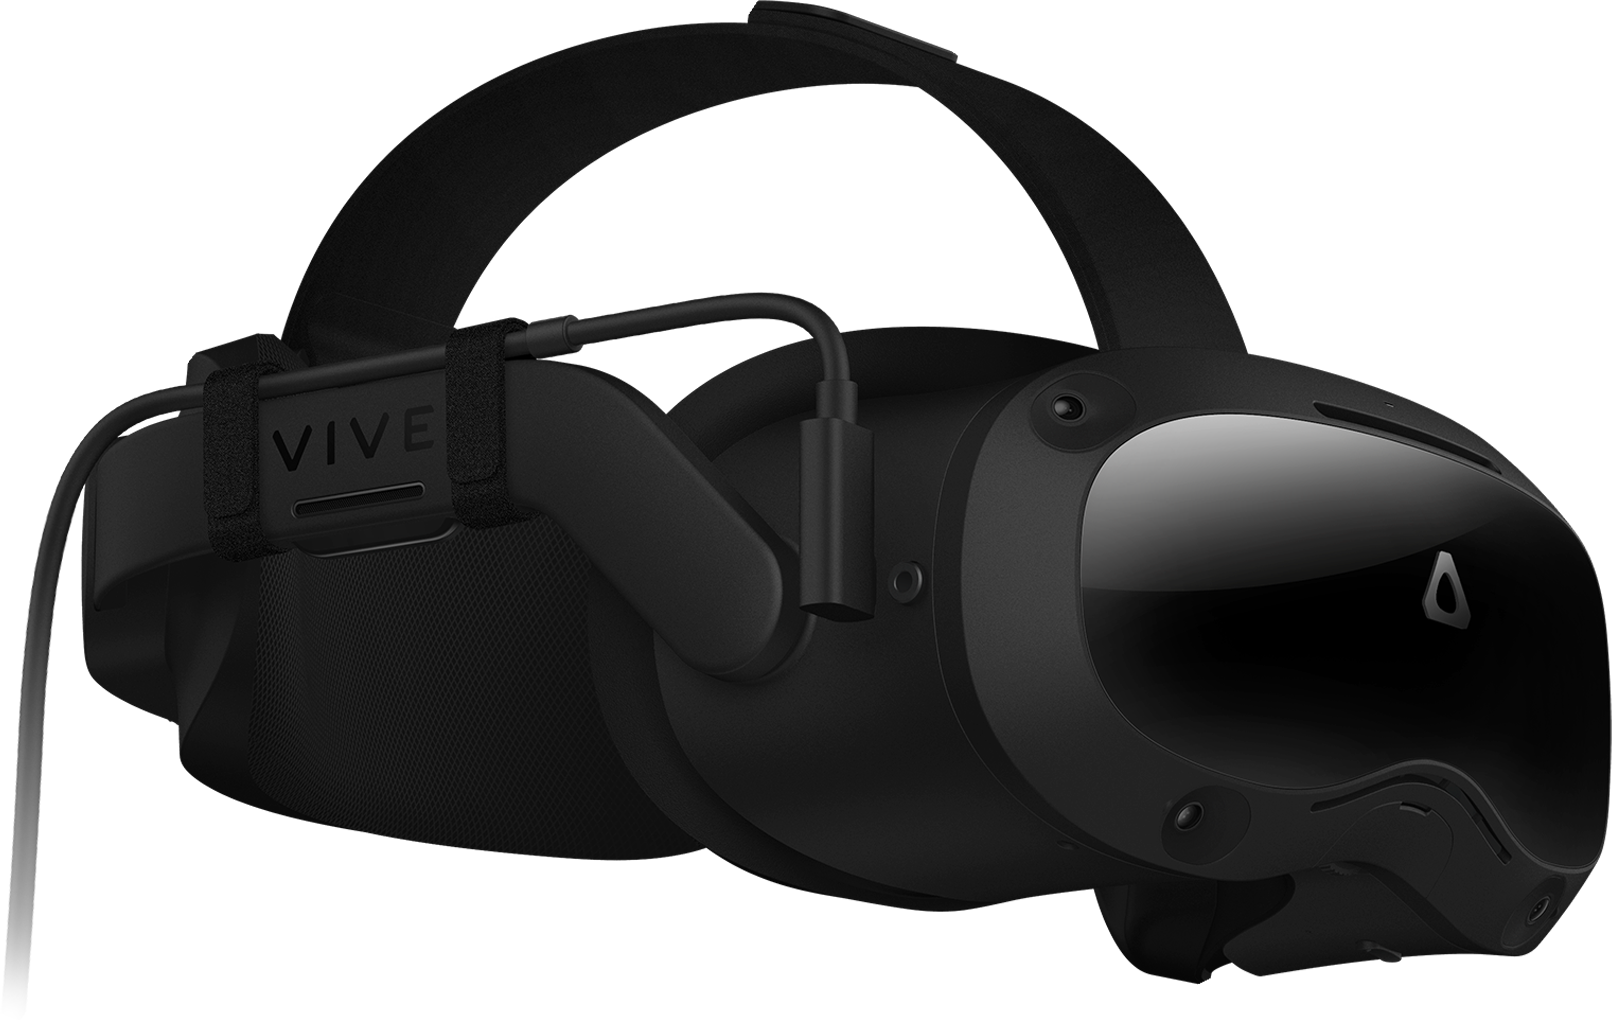 HTC VIVE Focus 3 - VR Headset for Metaverse Solutions